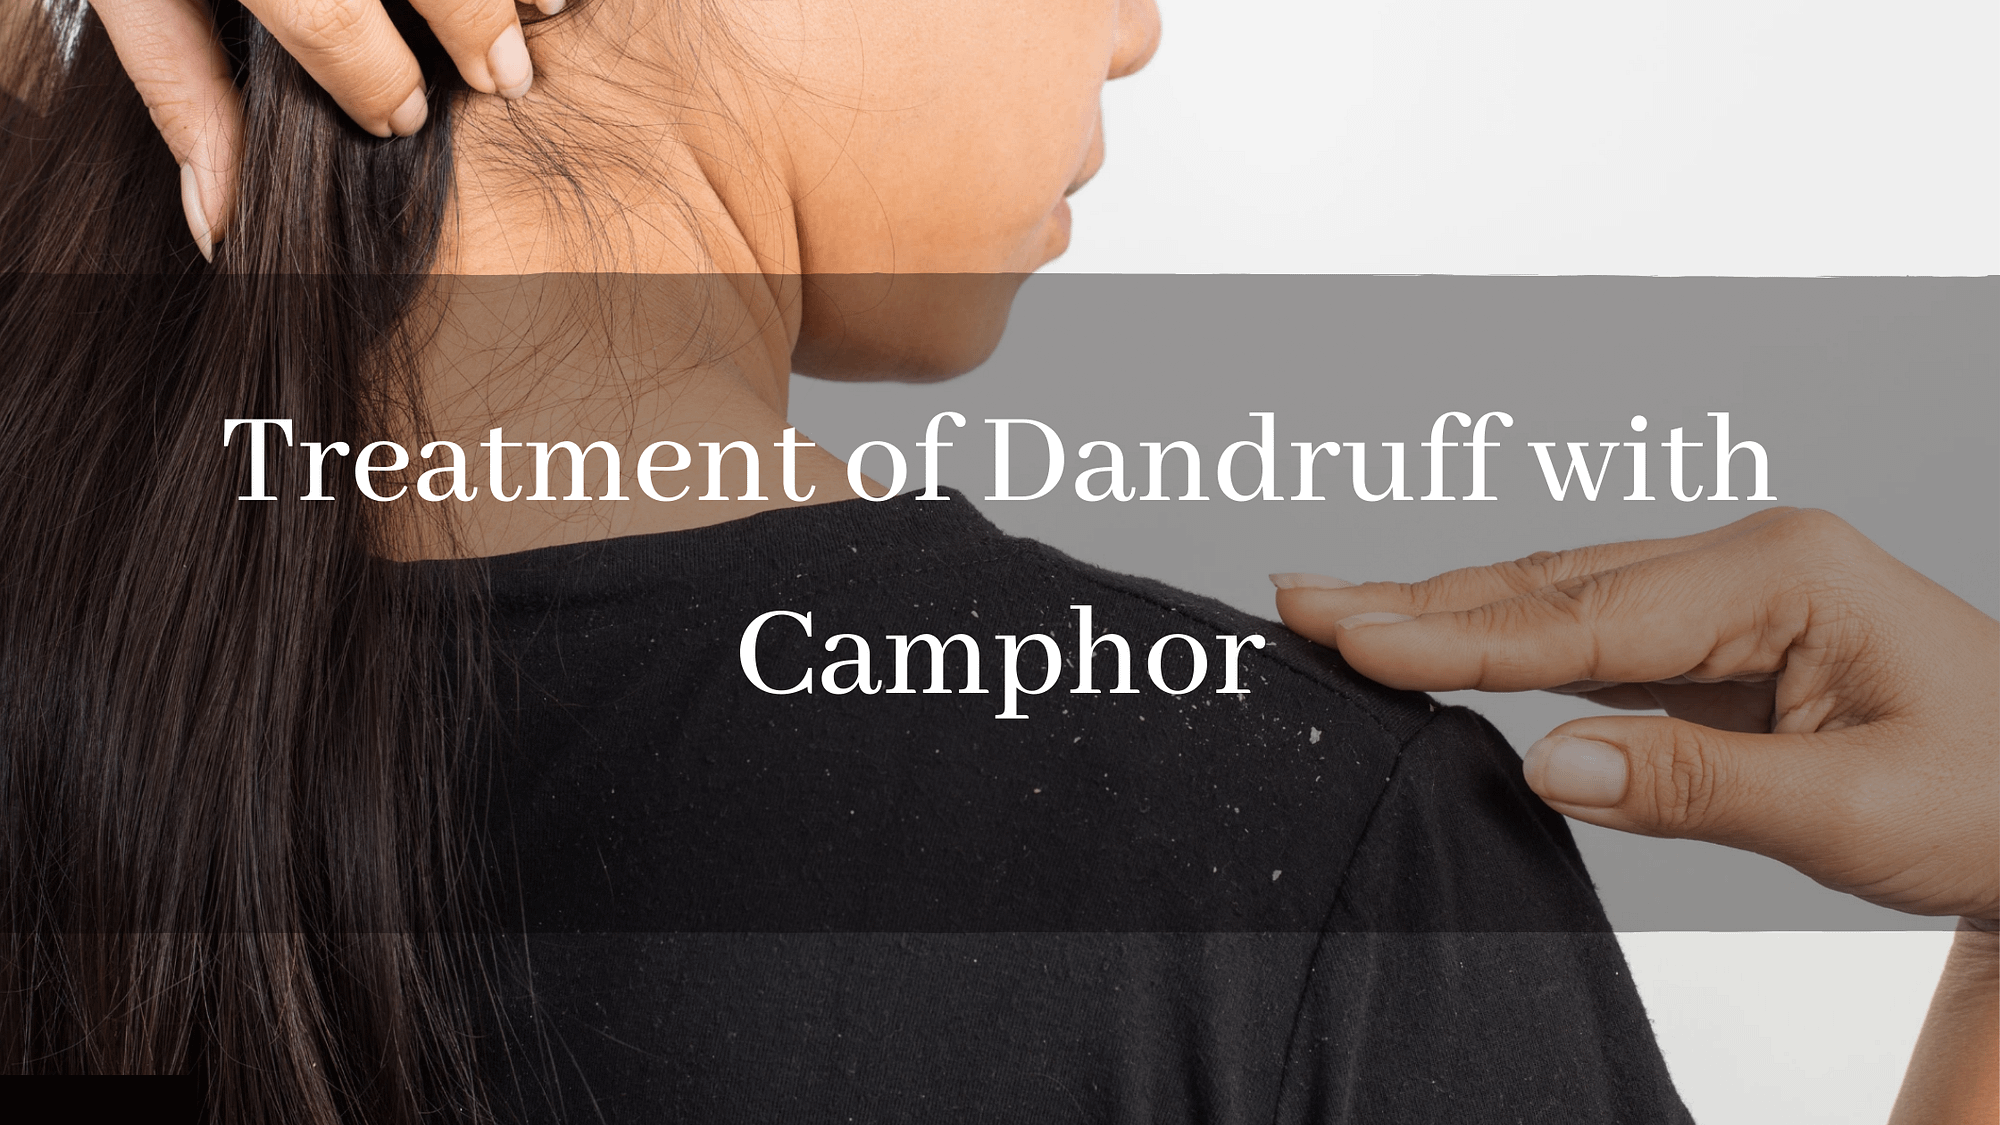 Treatment of Dandruff with Camphor